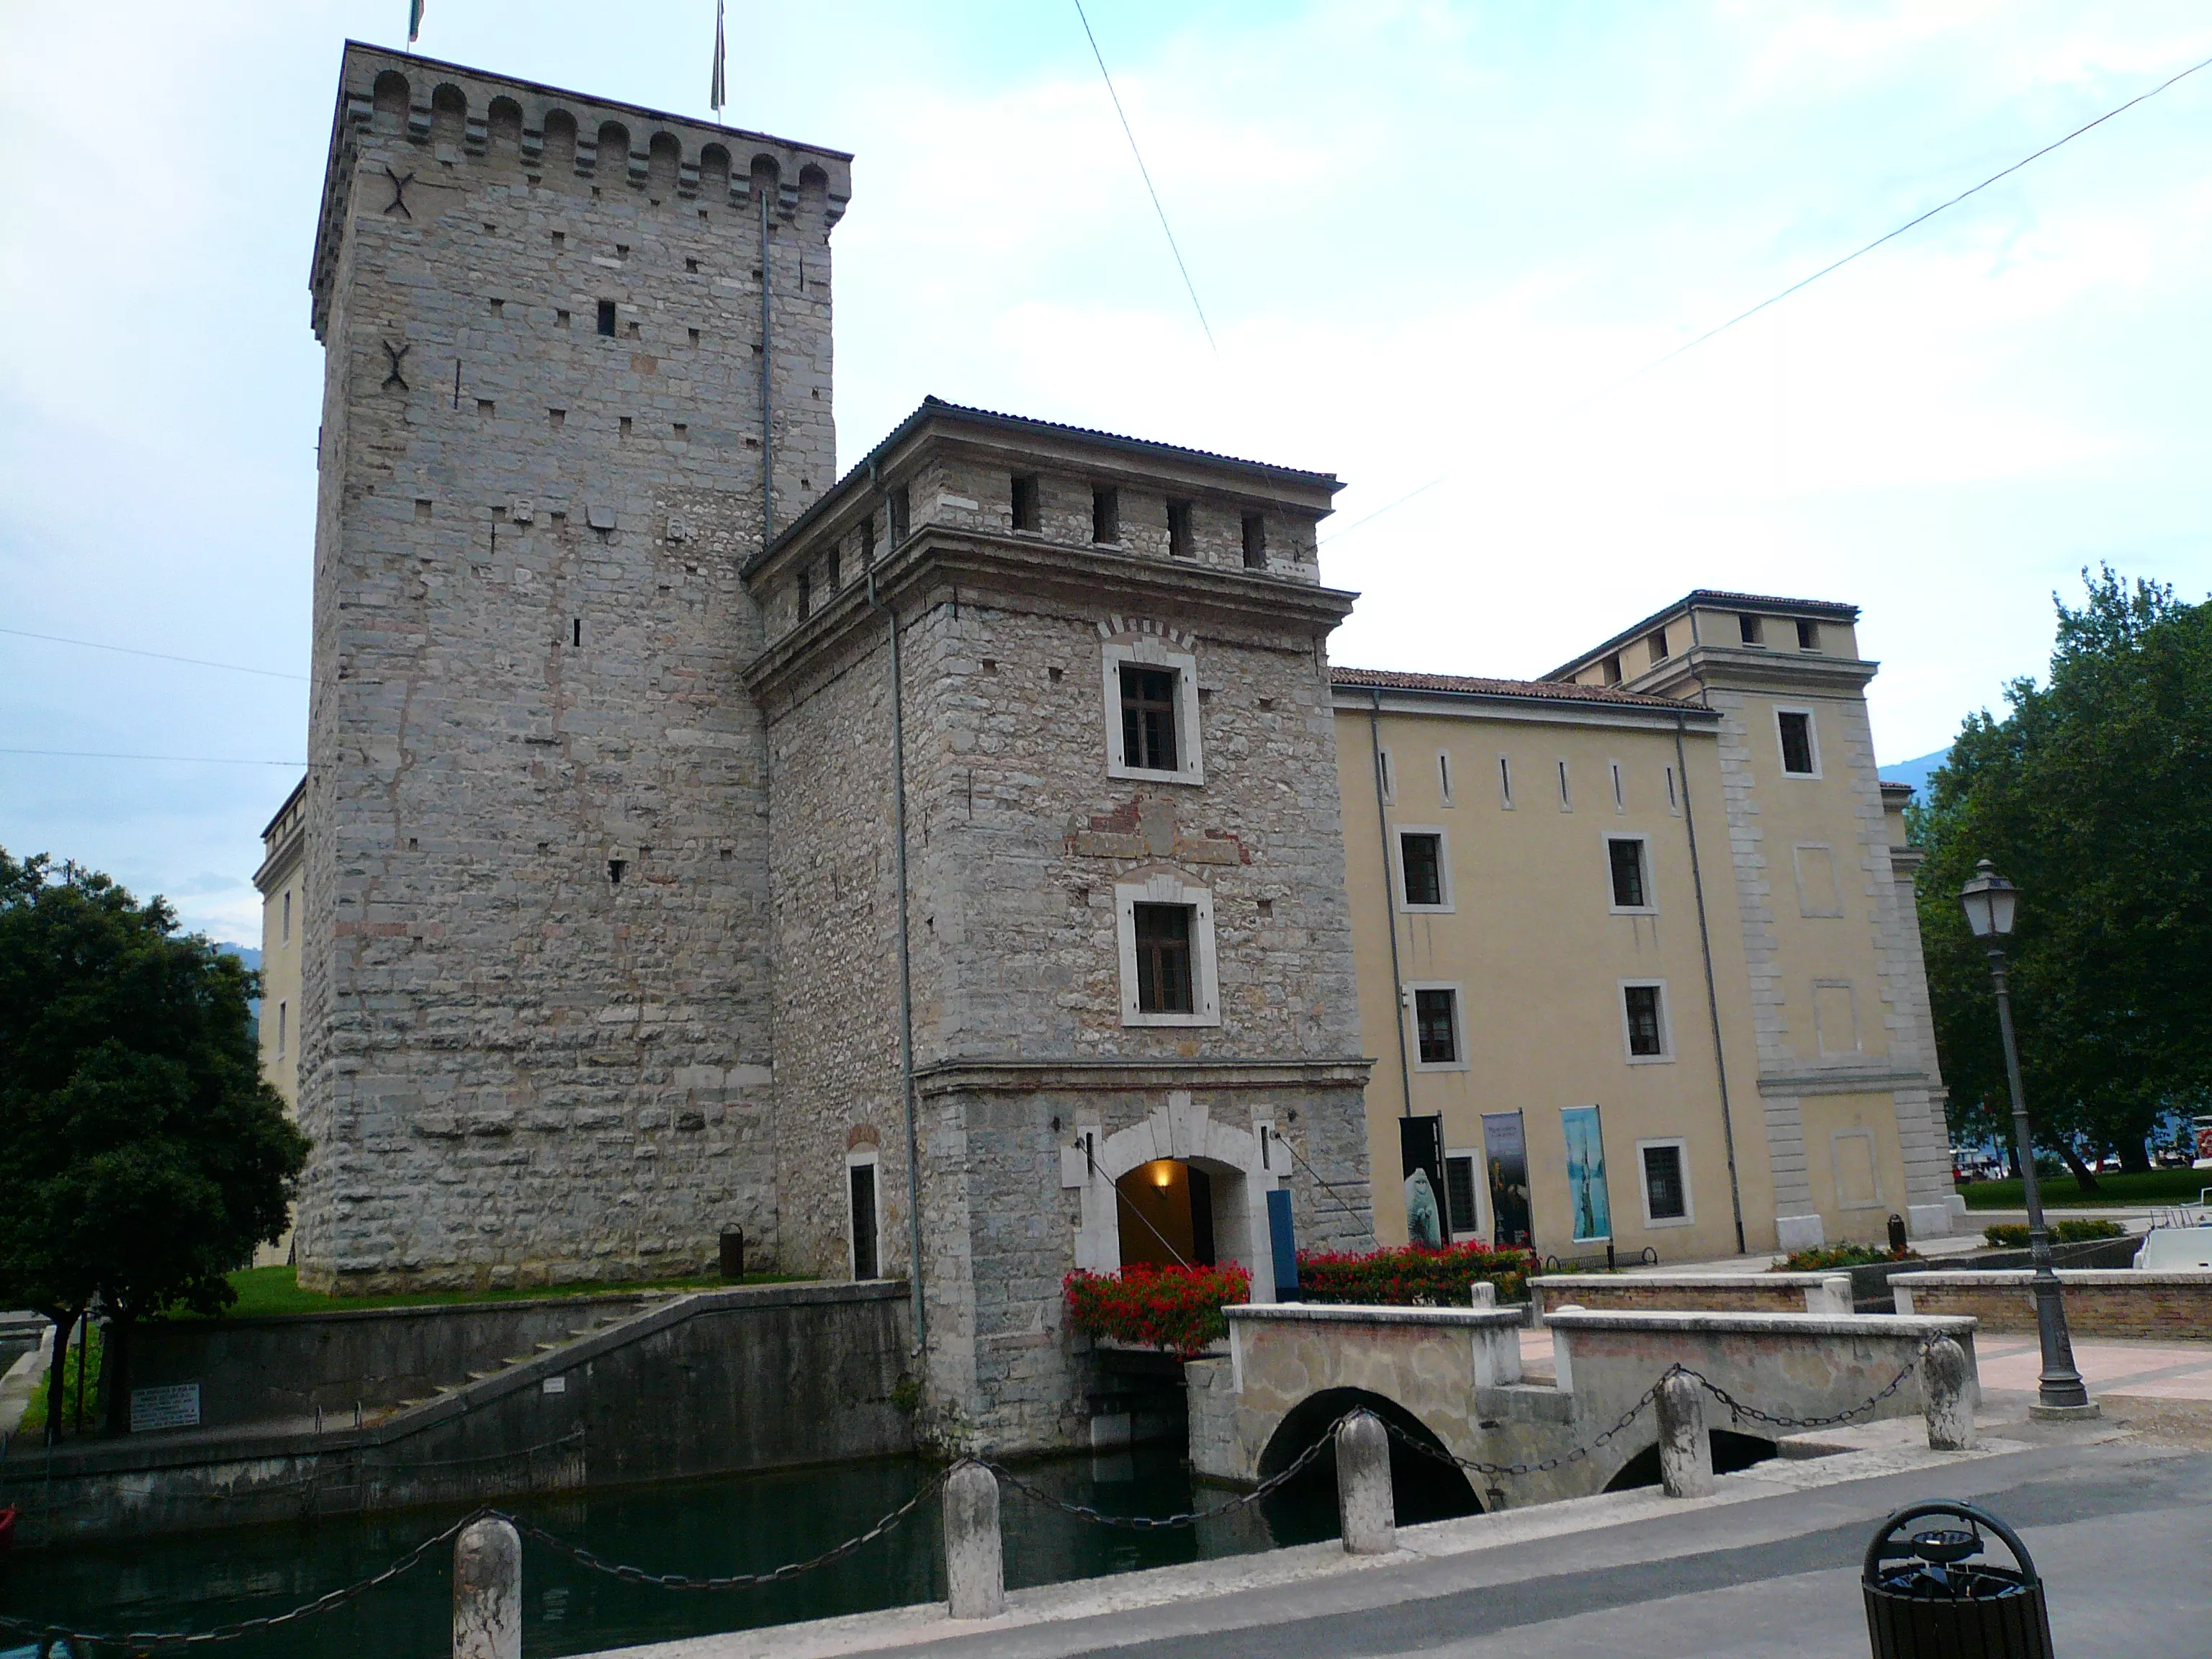 Rocca in Italy, Europe | Architecture - Rated 3.5